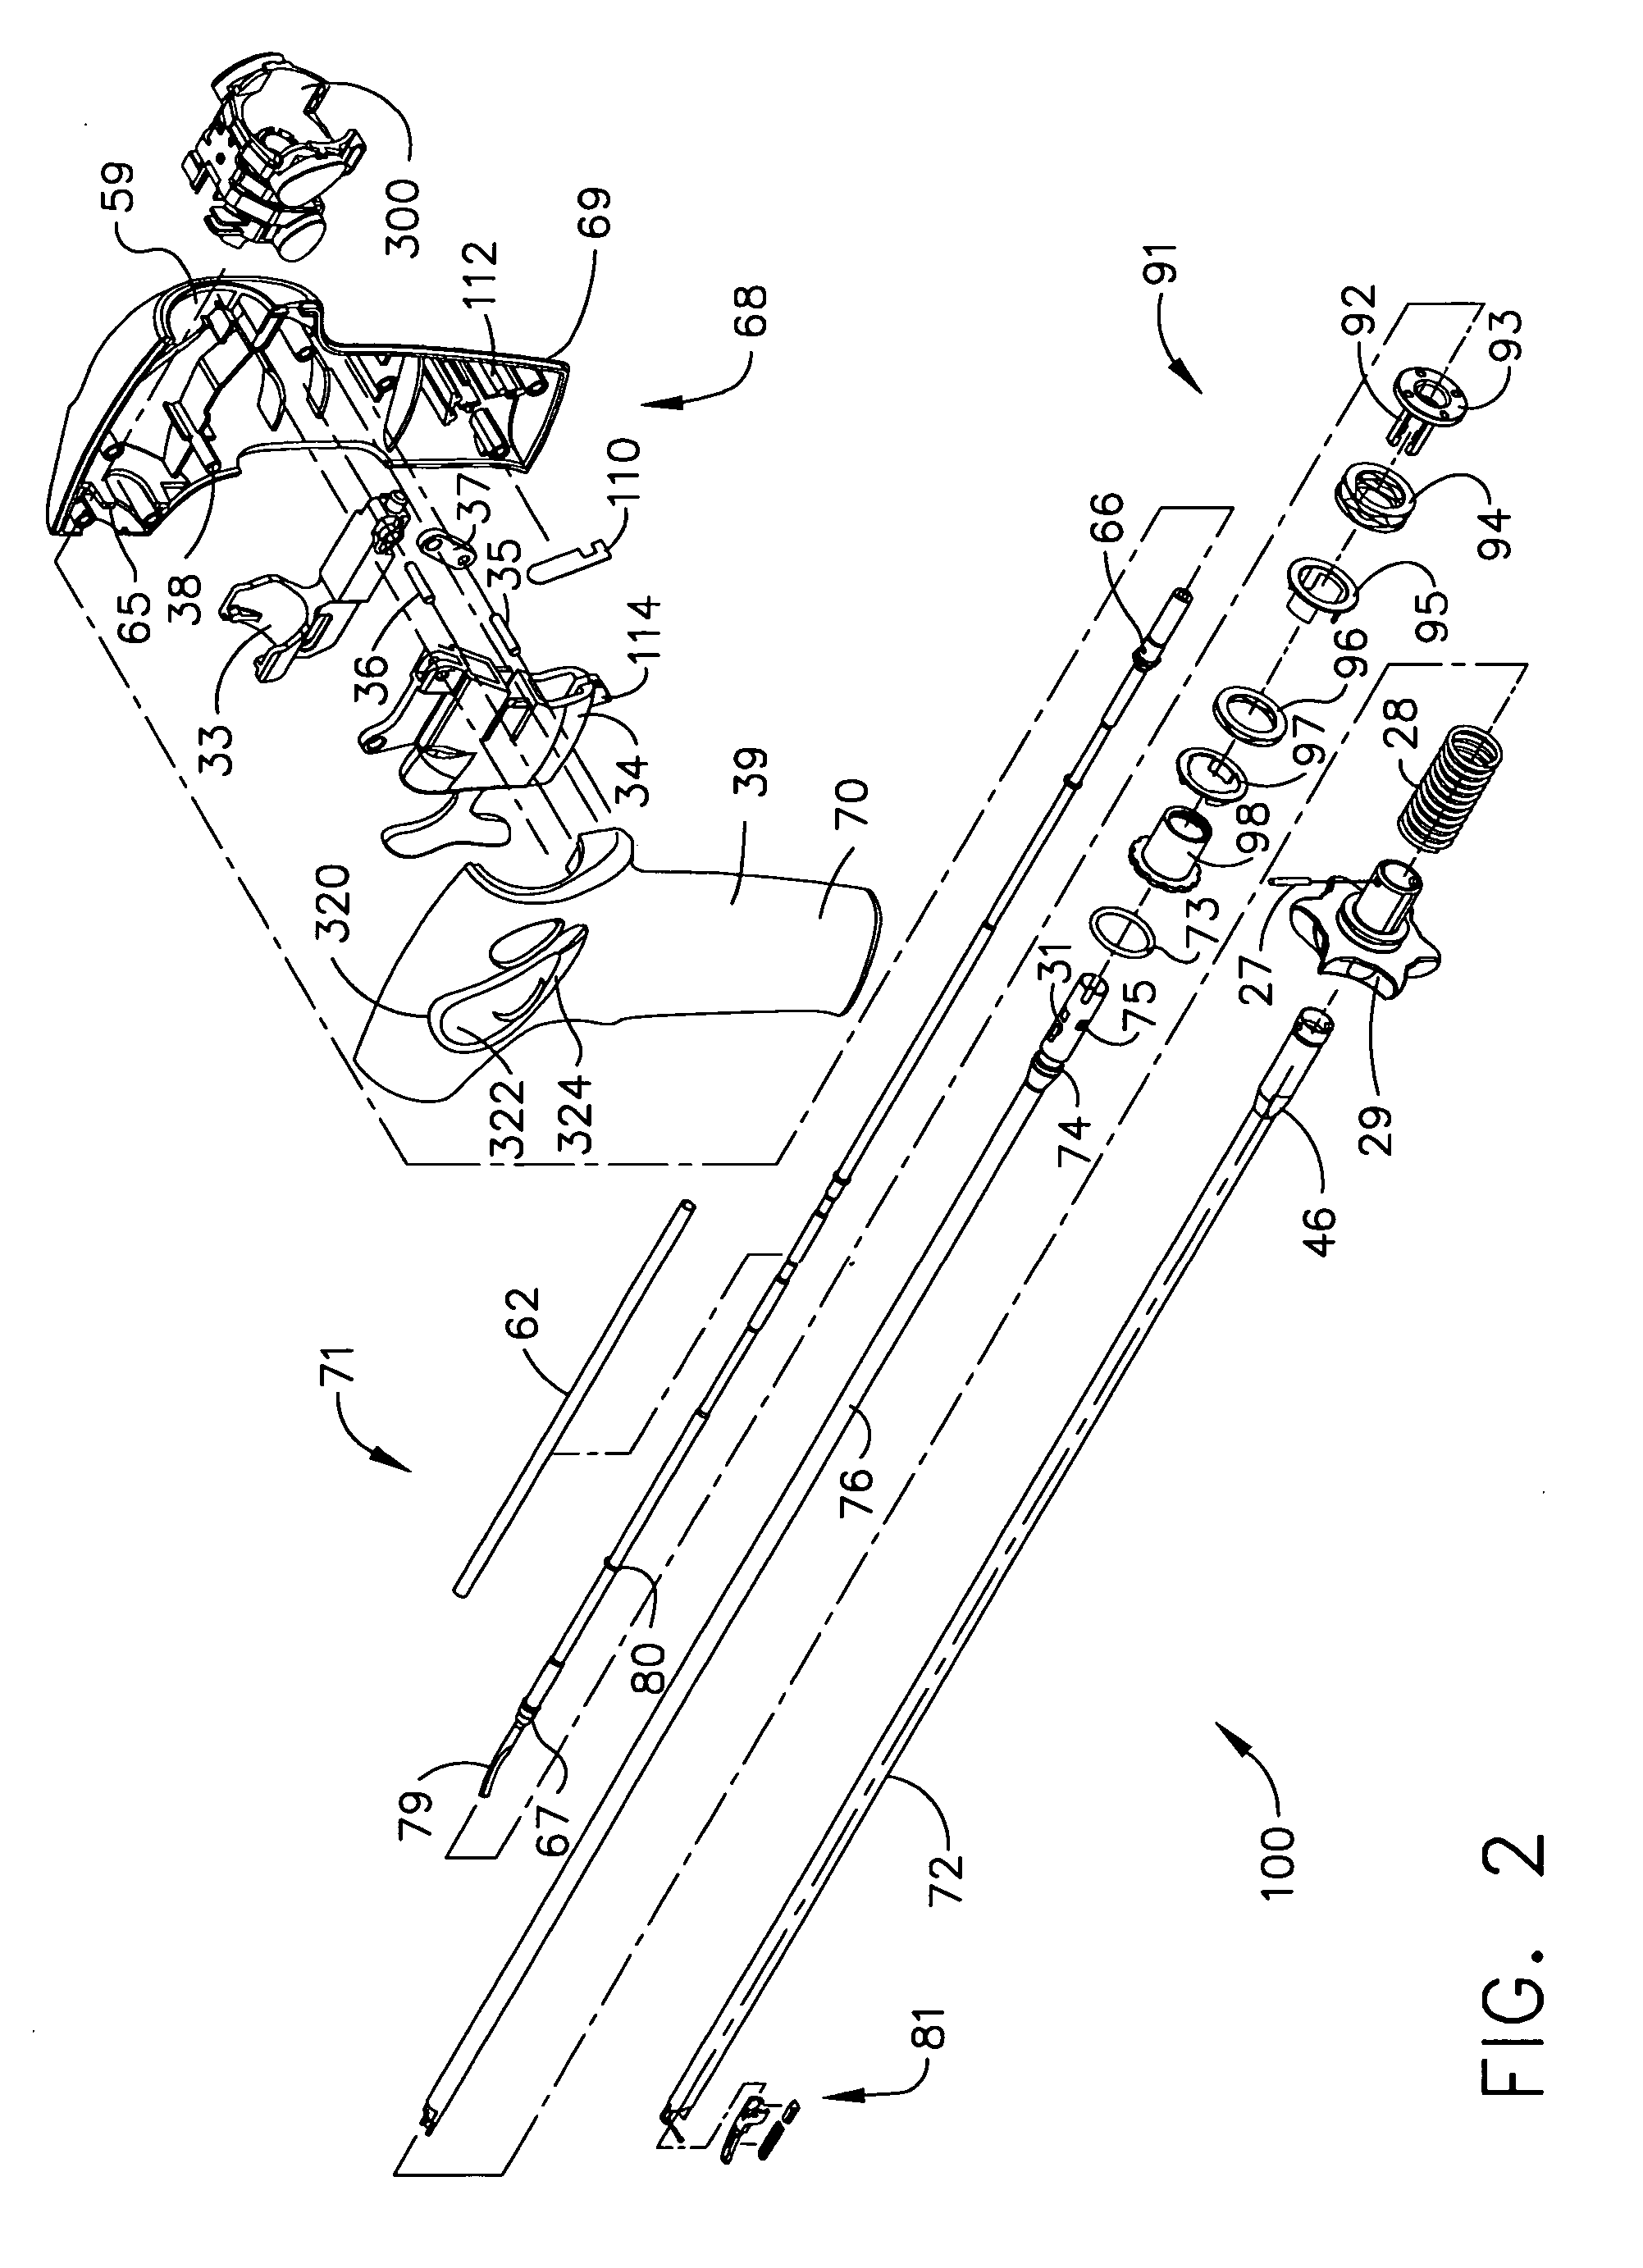 Handle assembly having hand activation for use with an ultrasonic surgical instrument